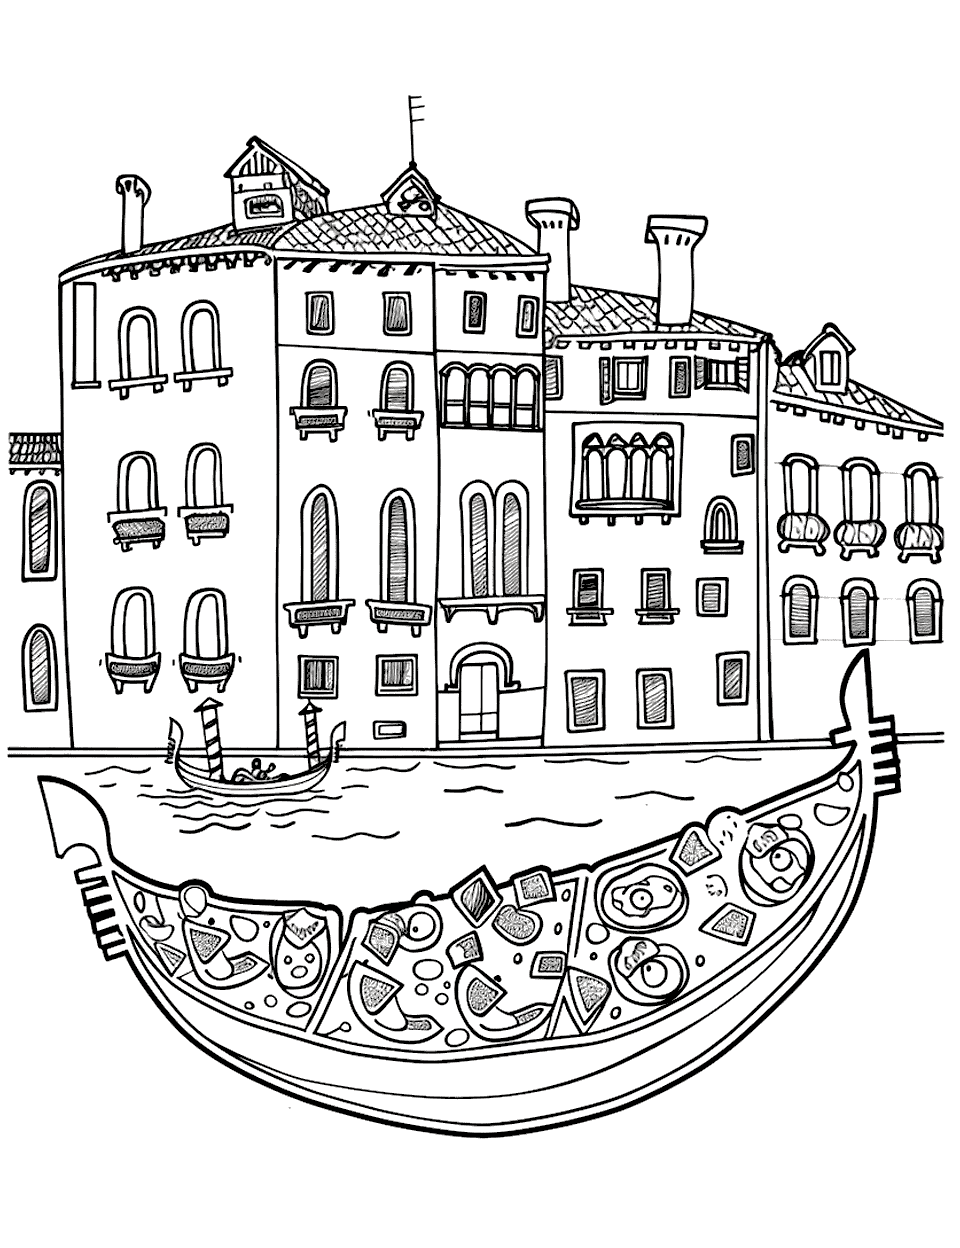 A Slice of Venice Pizza Coloring Page - A pizza slice boat with gondola-themed toppings floating in a Venice canal.